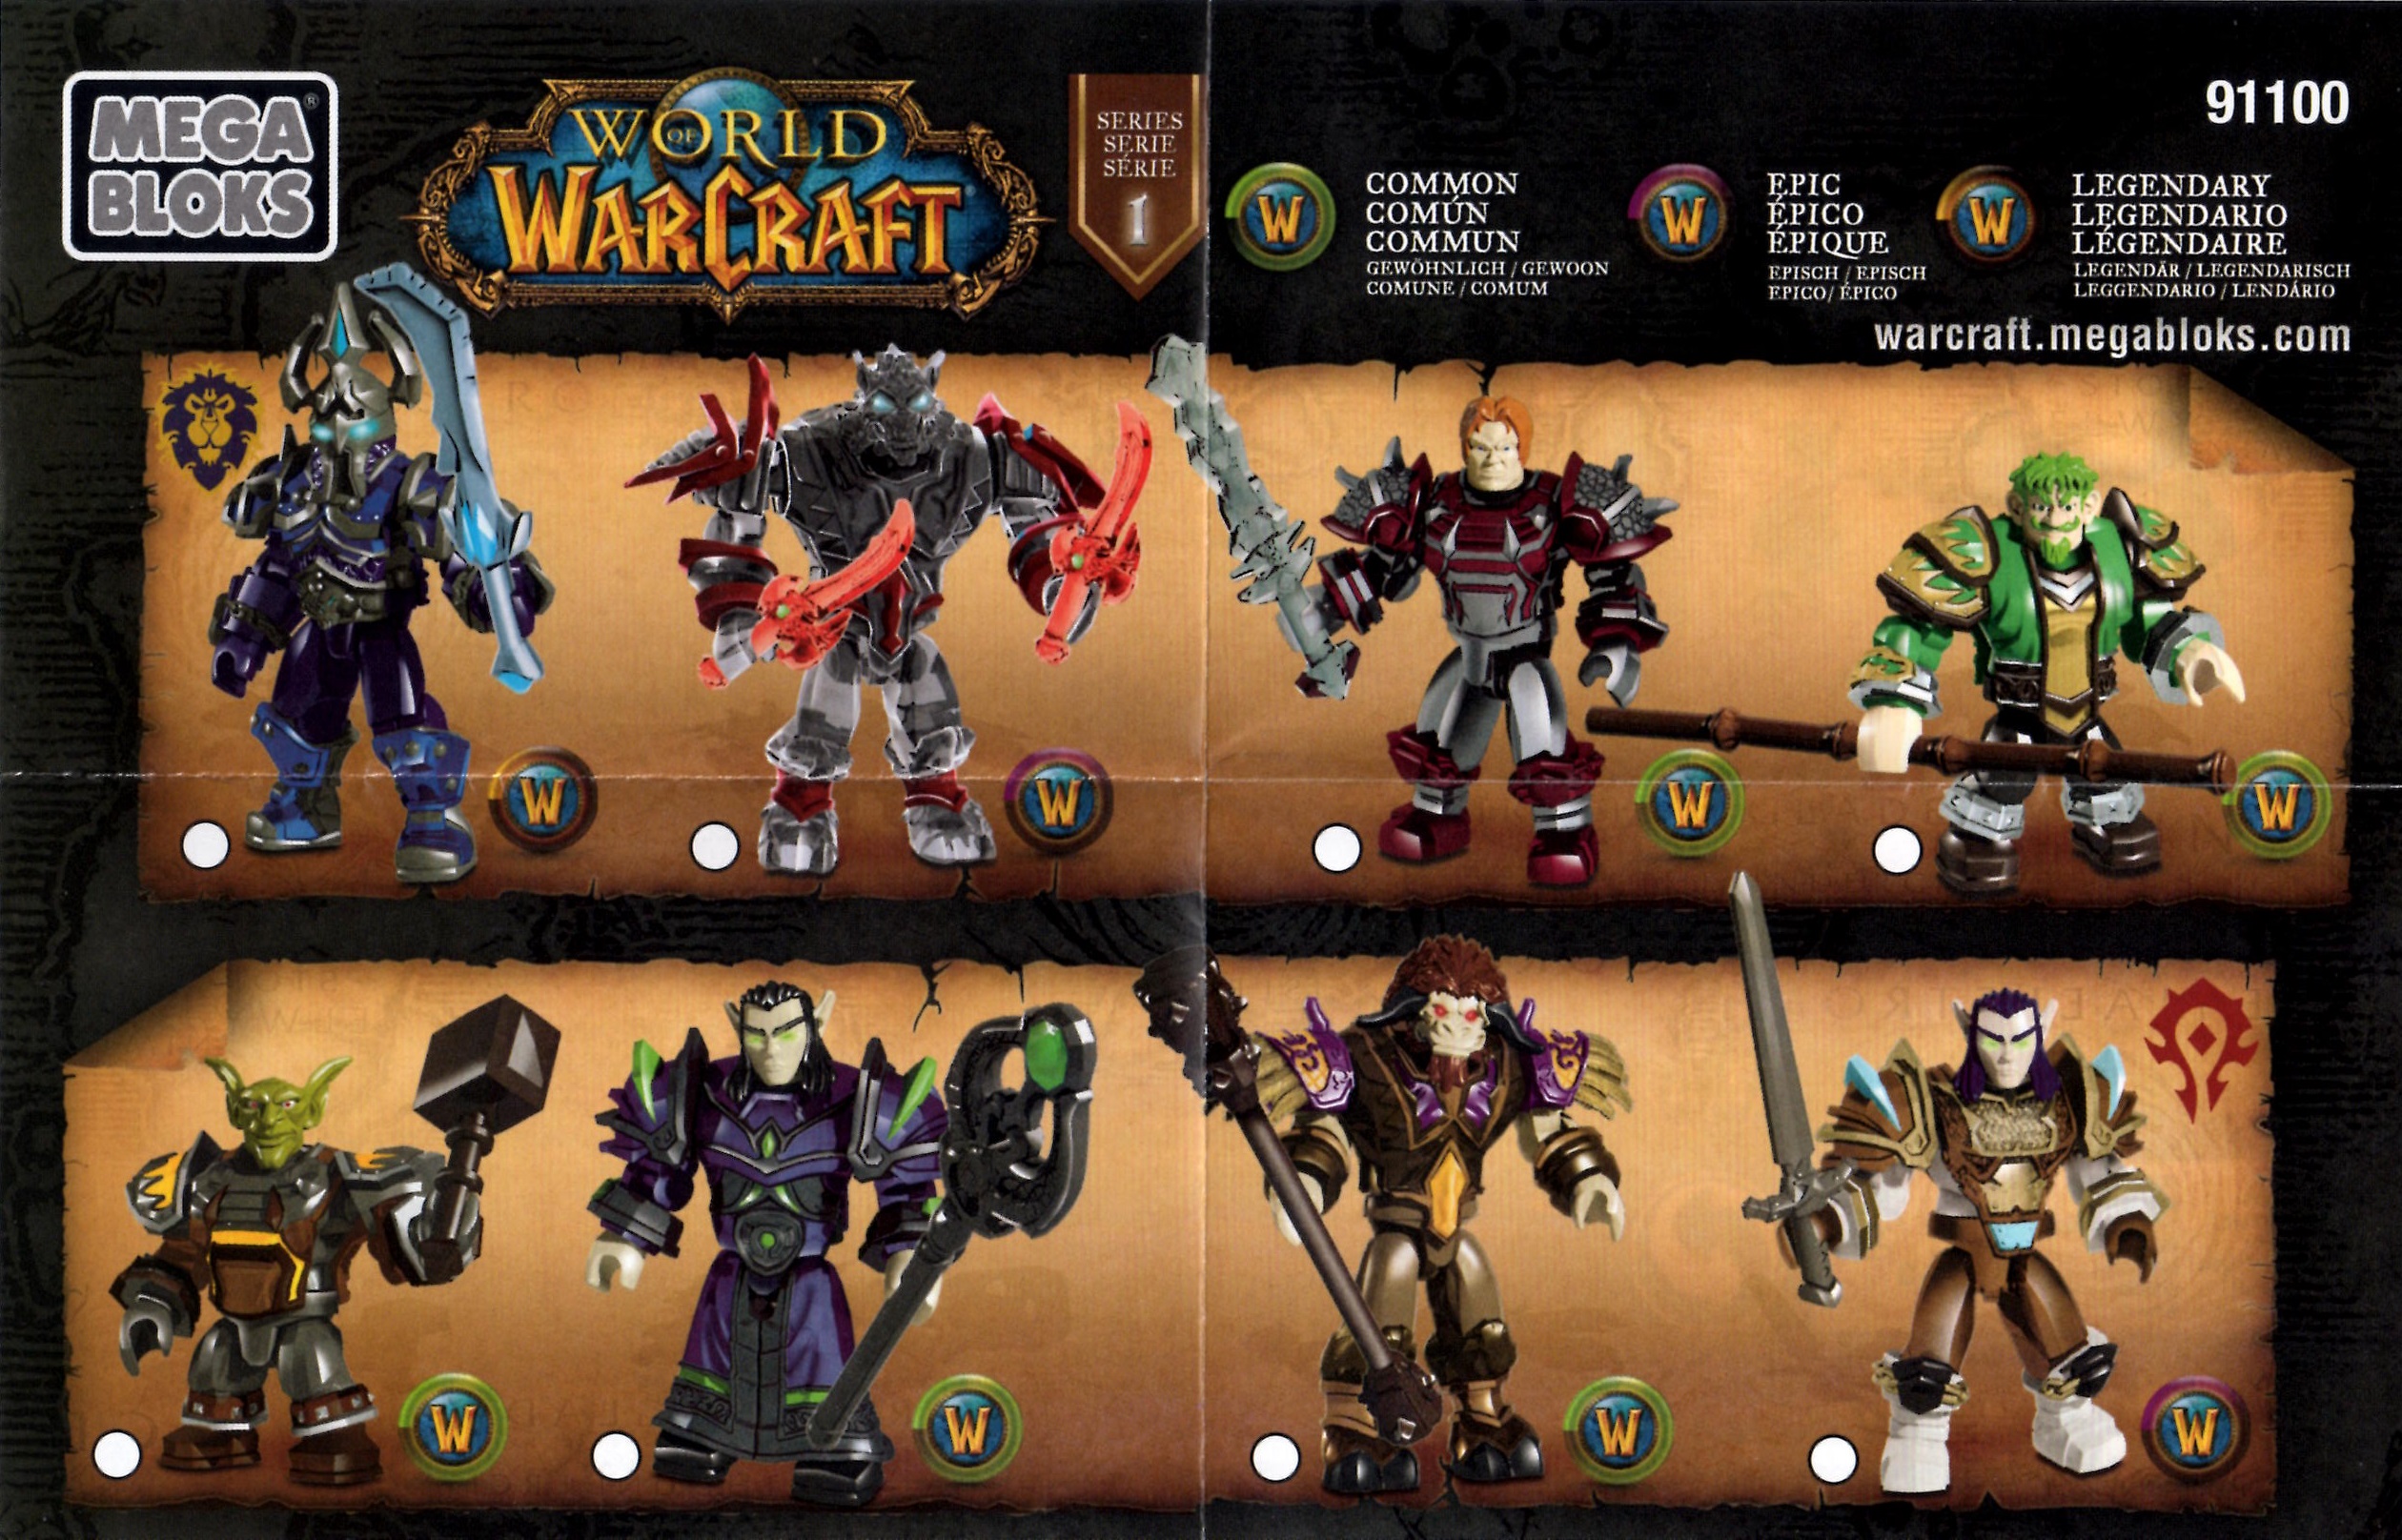 Pinpoint Trivial Vælge Mega Bloks World of Warcraft Series 1 Blind Bags - Minifigure Price Guide